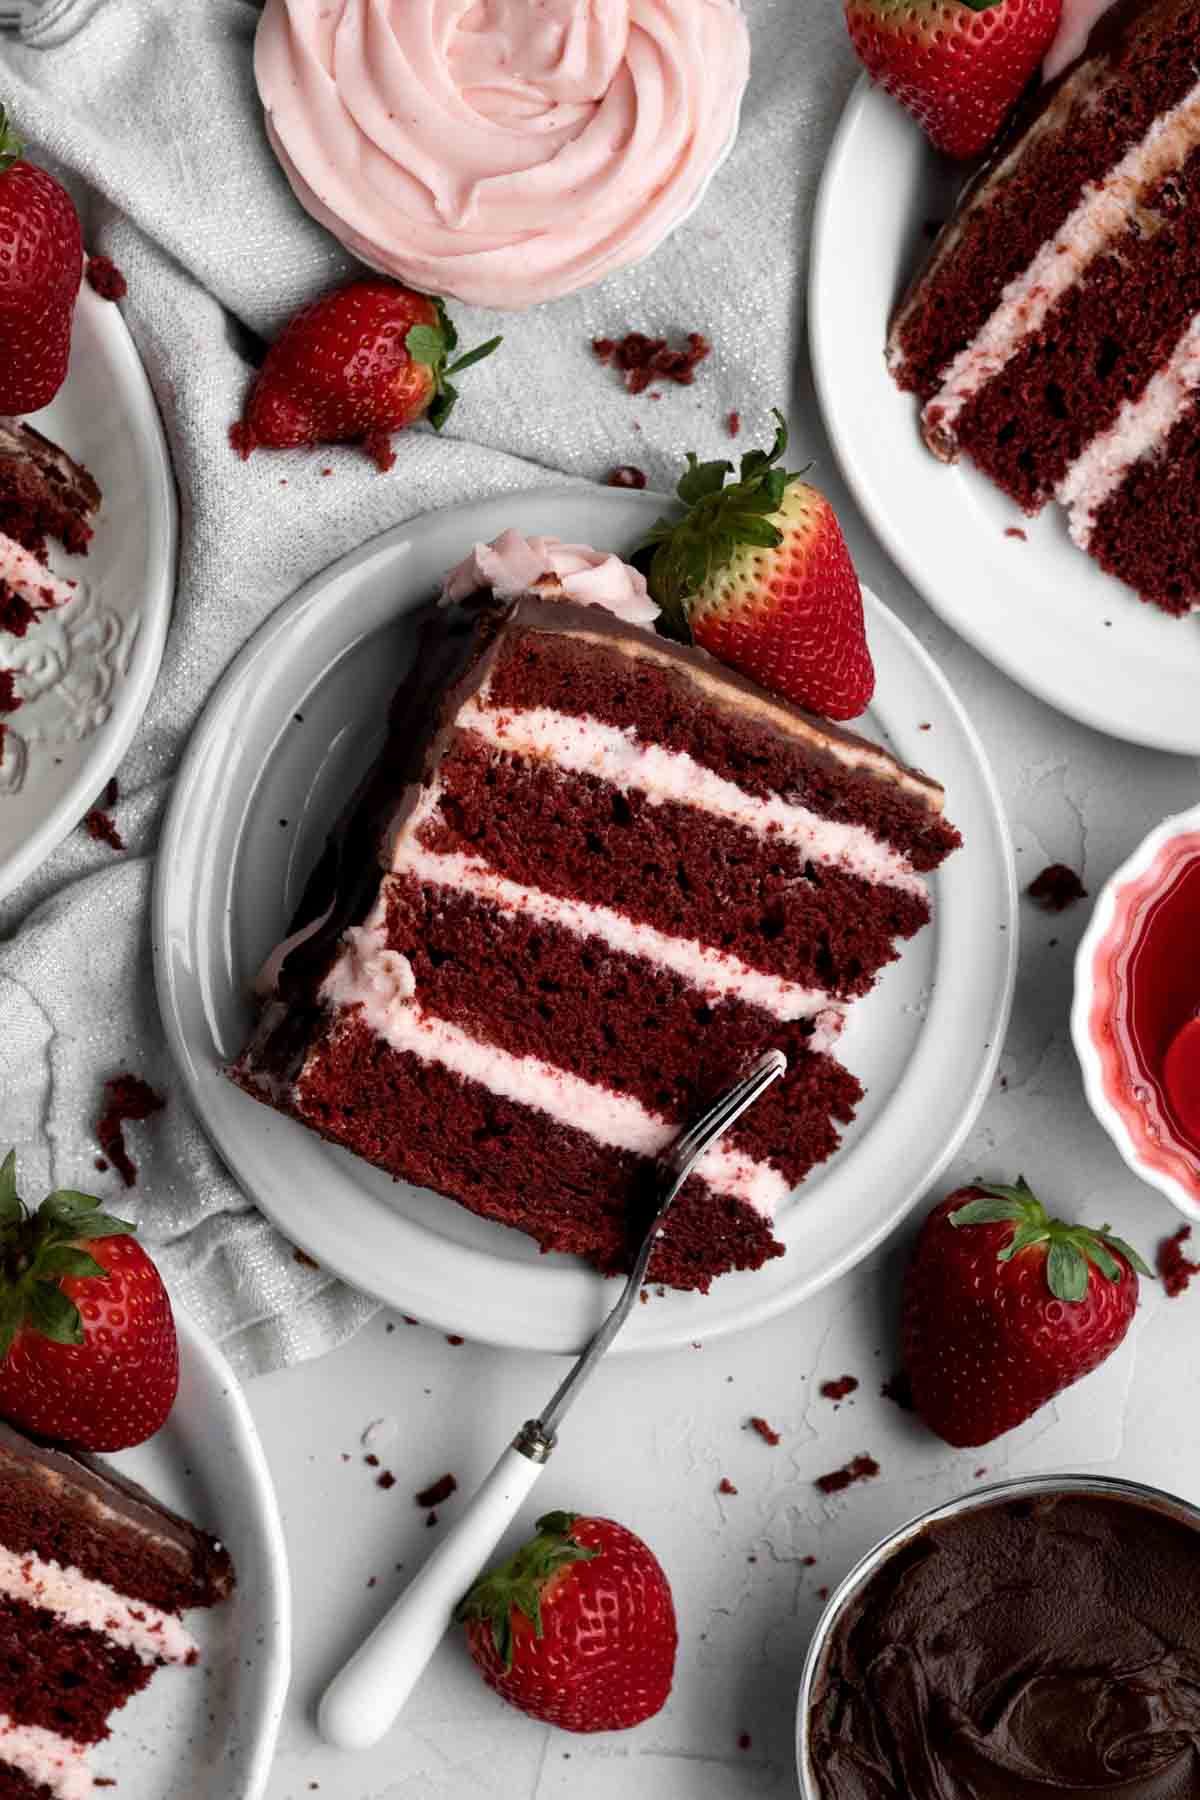 Taking a fork to a slice of red cake.